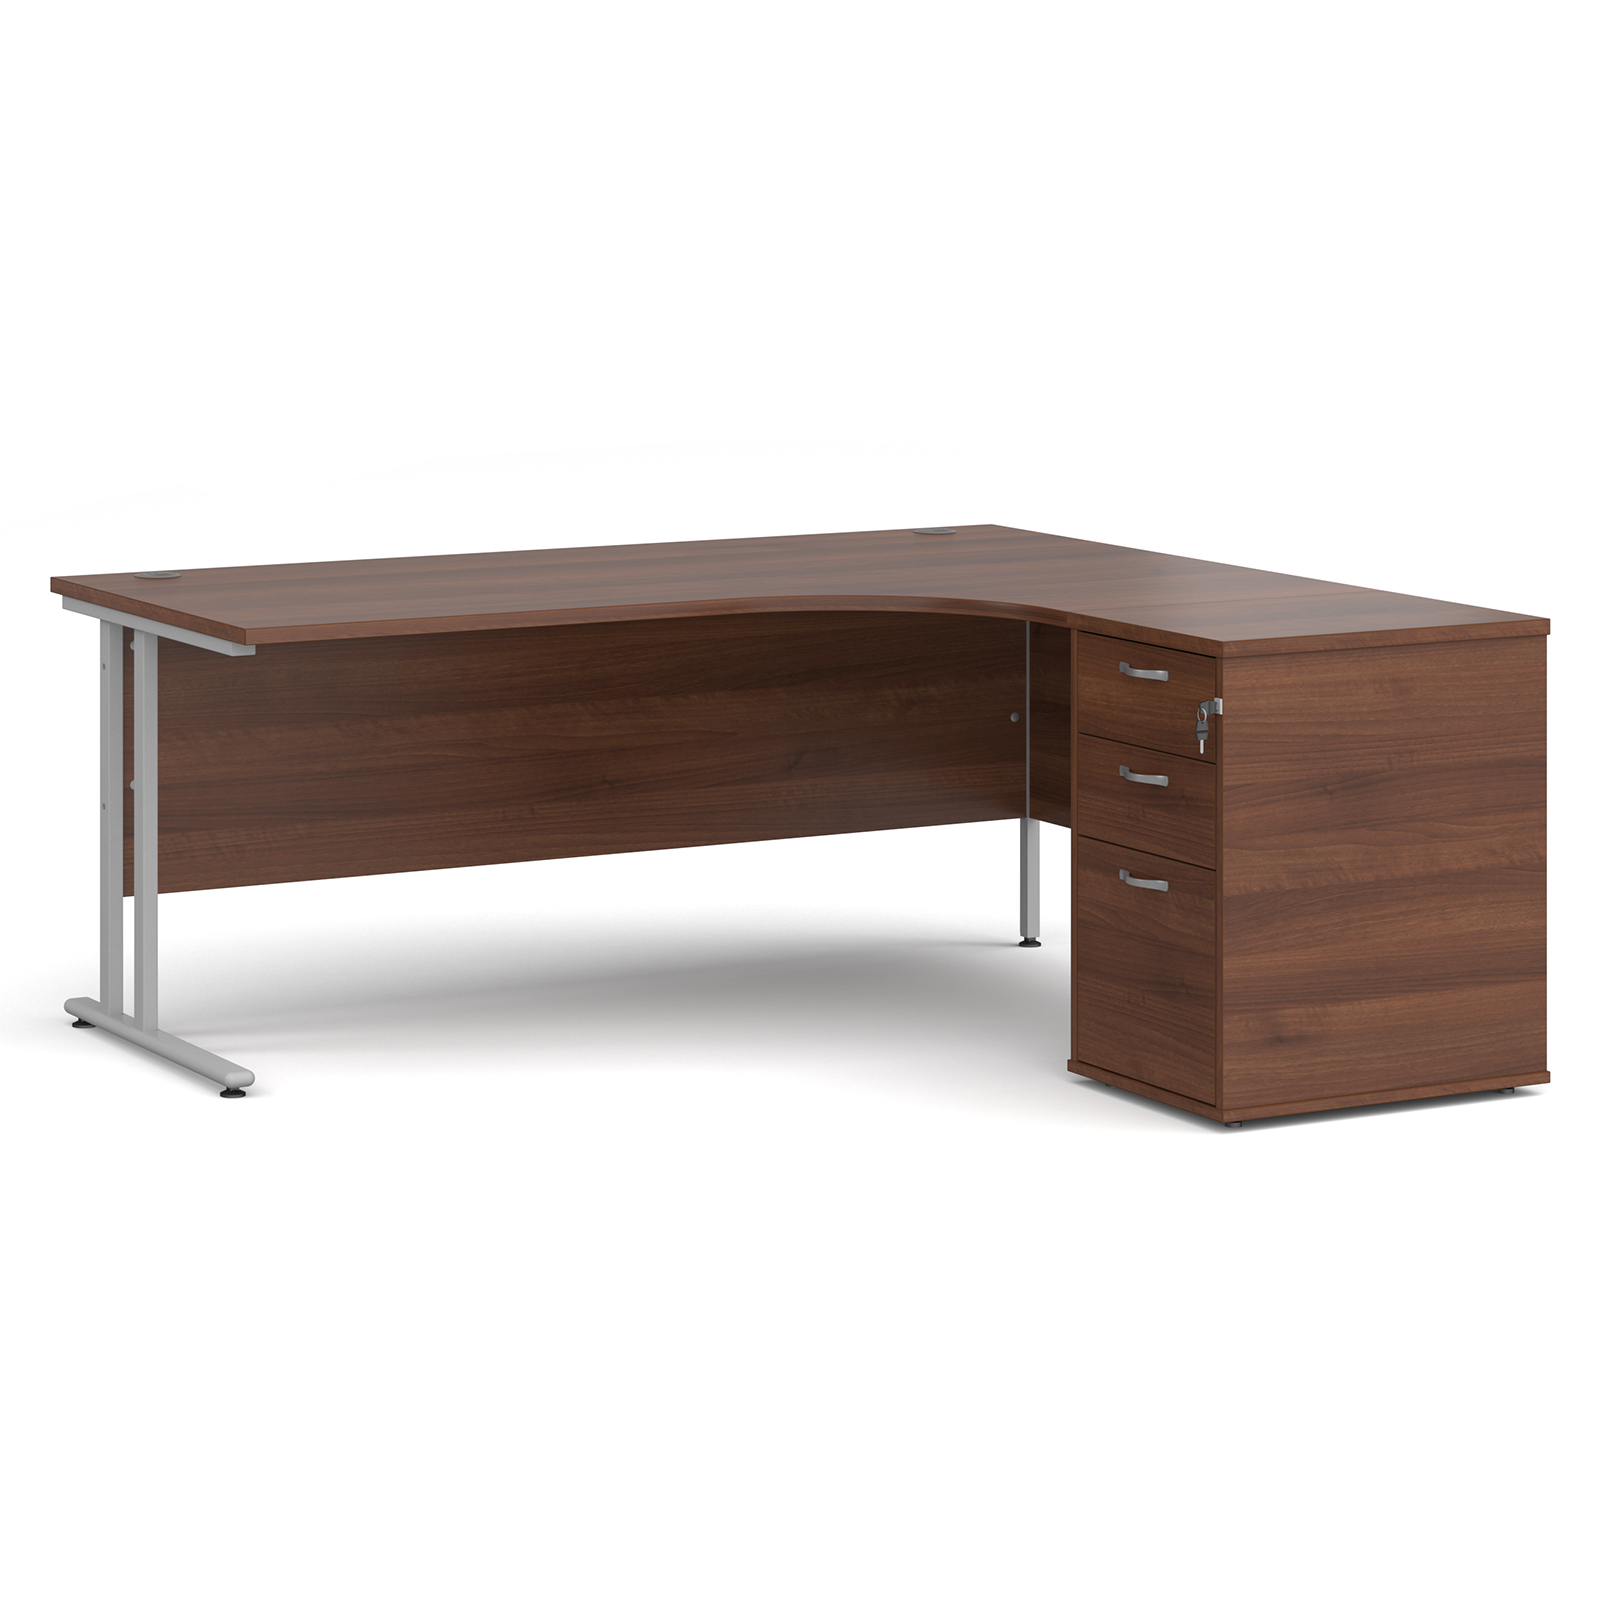 Right Handed Maestro 25 right hand ergonomic desk 1800mm with silver cantilever frame and desk high pedestal - walnut